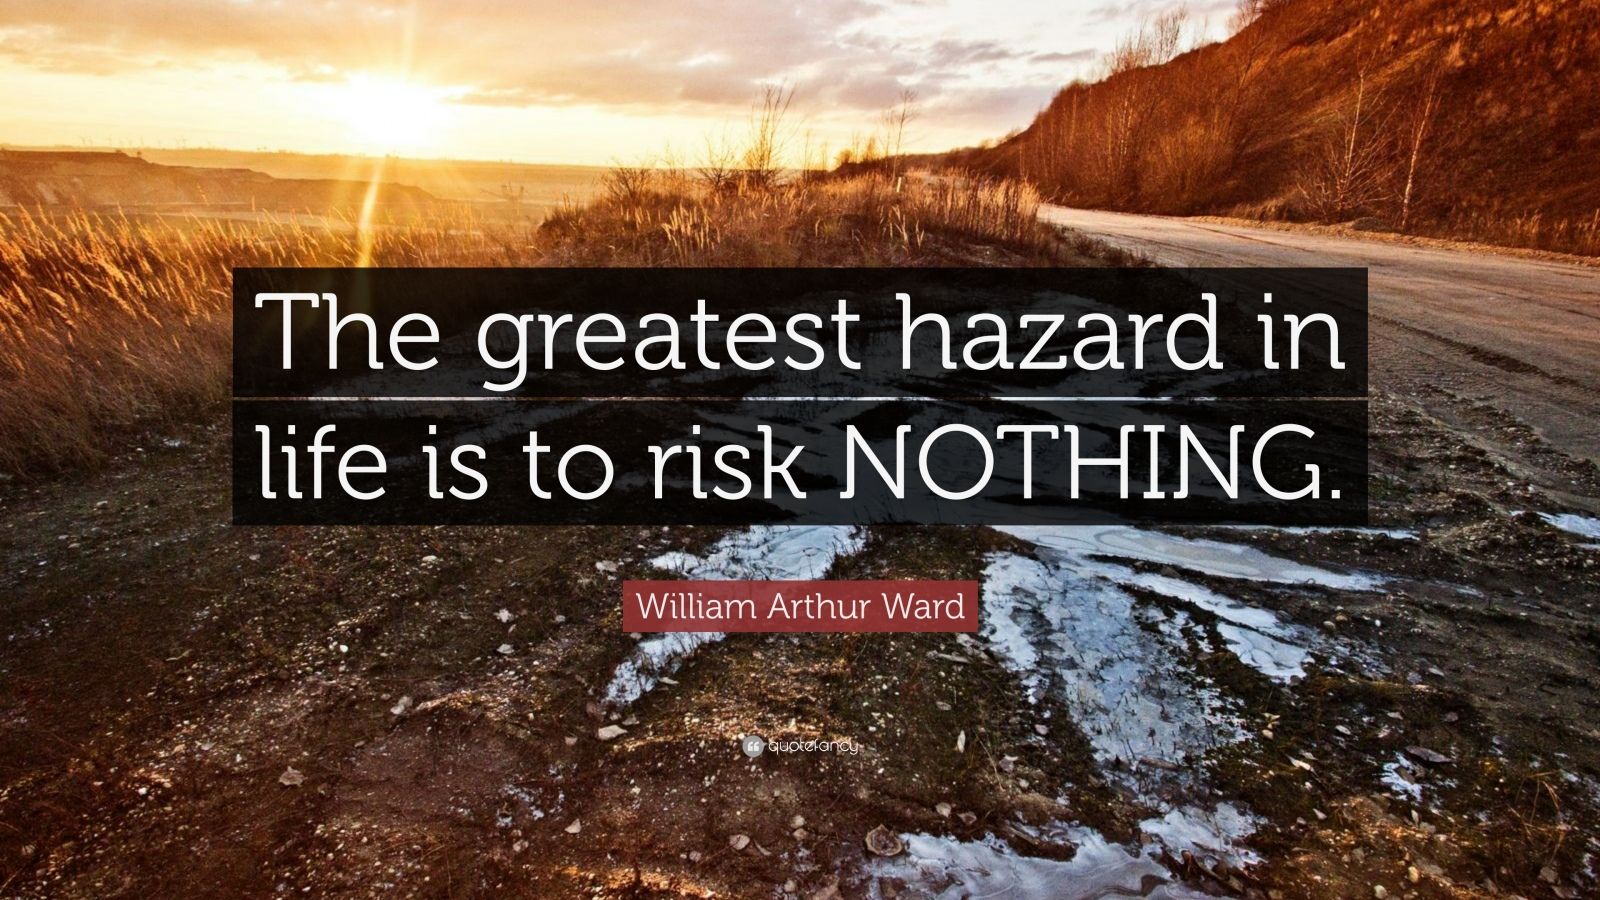 Top 40 Risk Quotes | 2021 Edition | Free Images - QuoteFancy